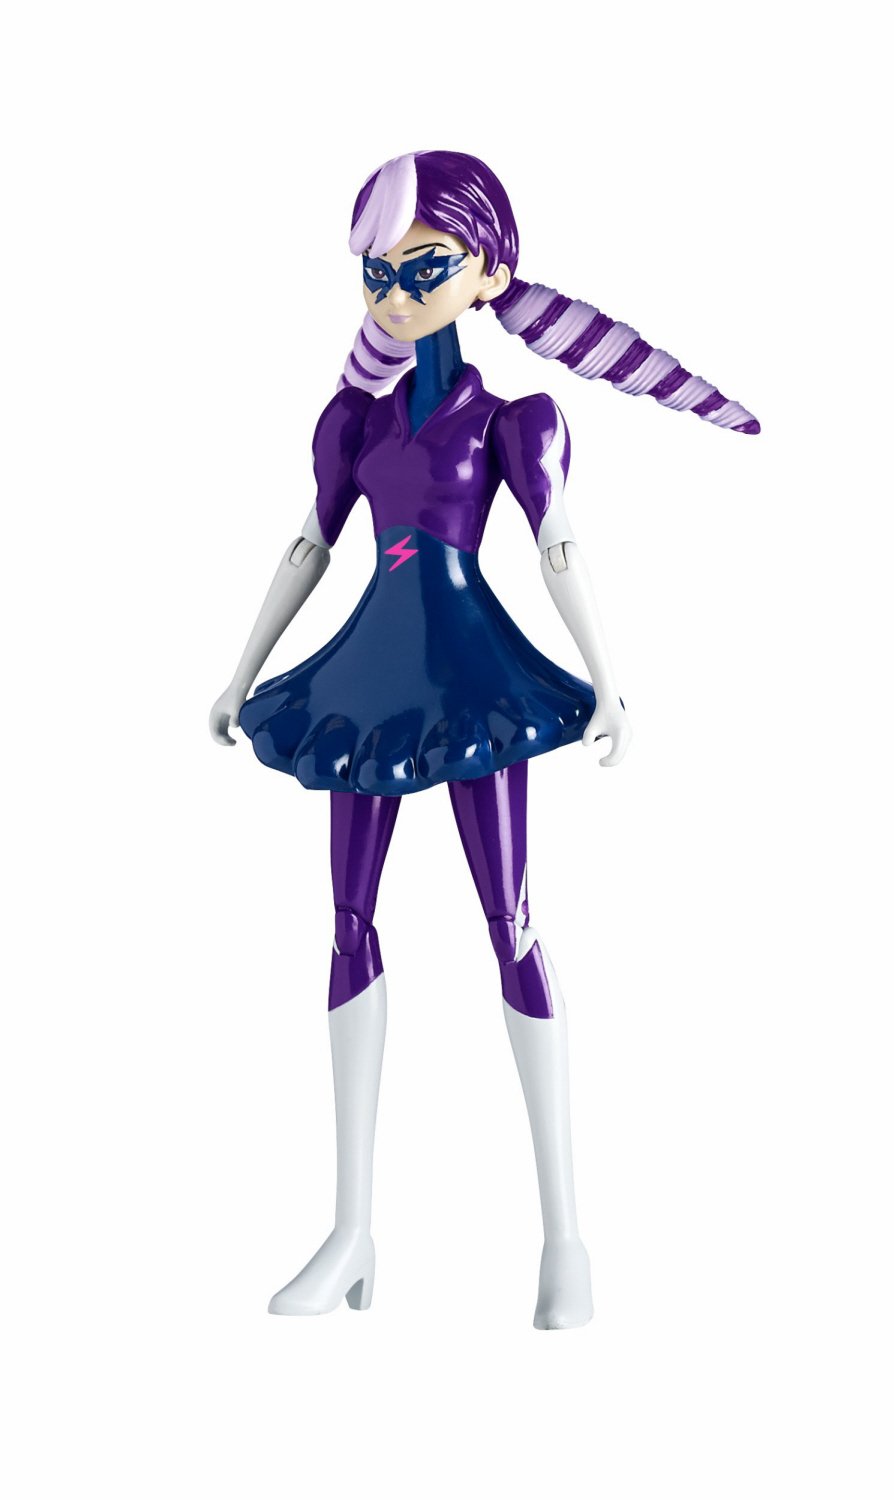 Miraculous Mlb 5.5 Action Doll Stormy Weather